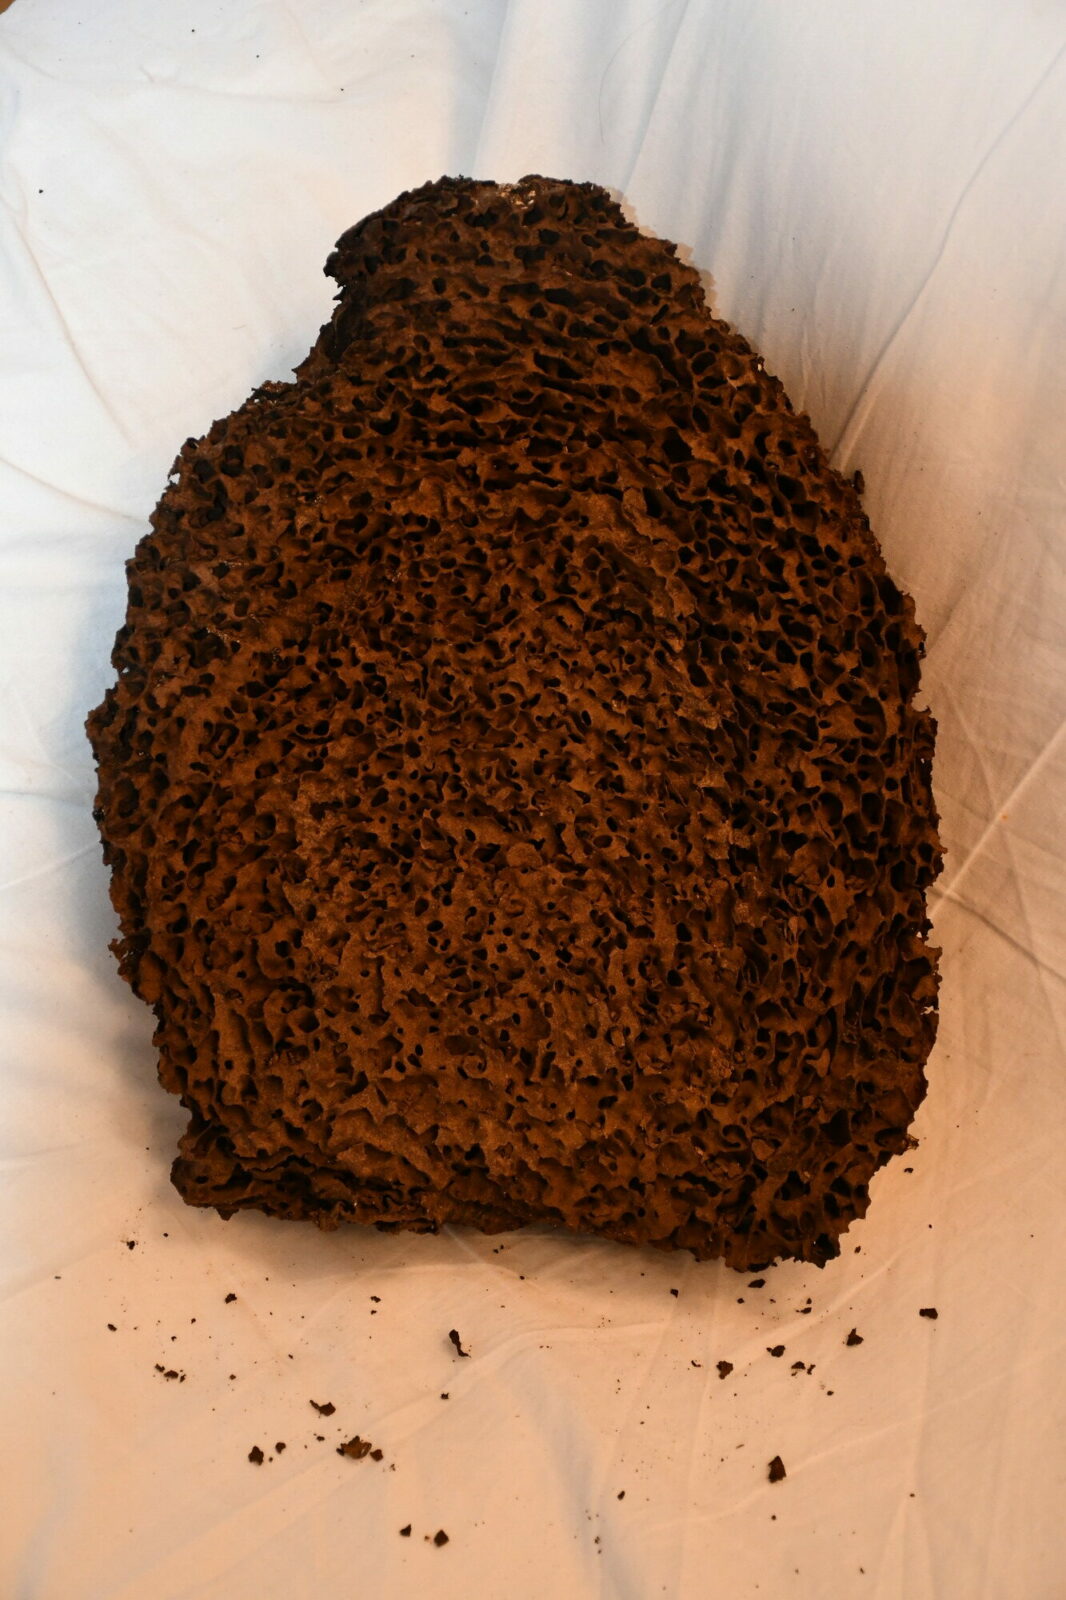 A nest of Nasutitermes graveolus (M19) cut to show the internal structure. The nest originates from Queensland, Australia. Photo A. Perna [CC BY-SA 3.0 (http://creativecommons.org/licenses/by-sa/3.0)]